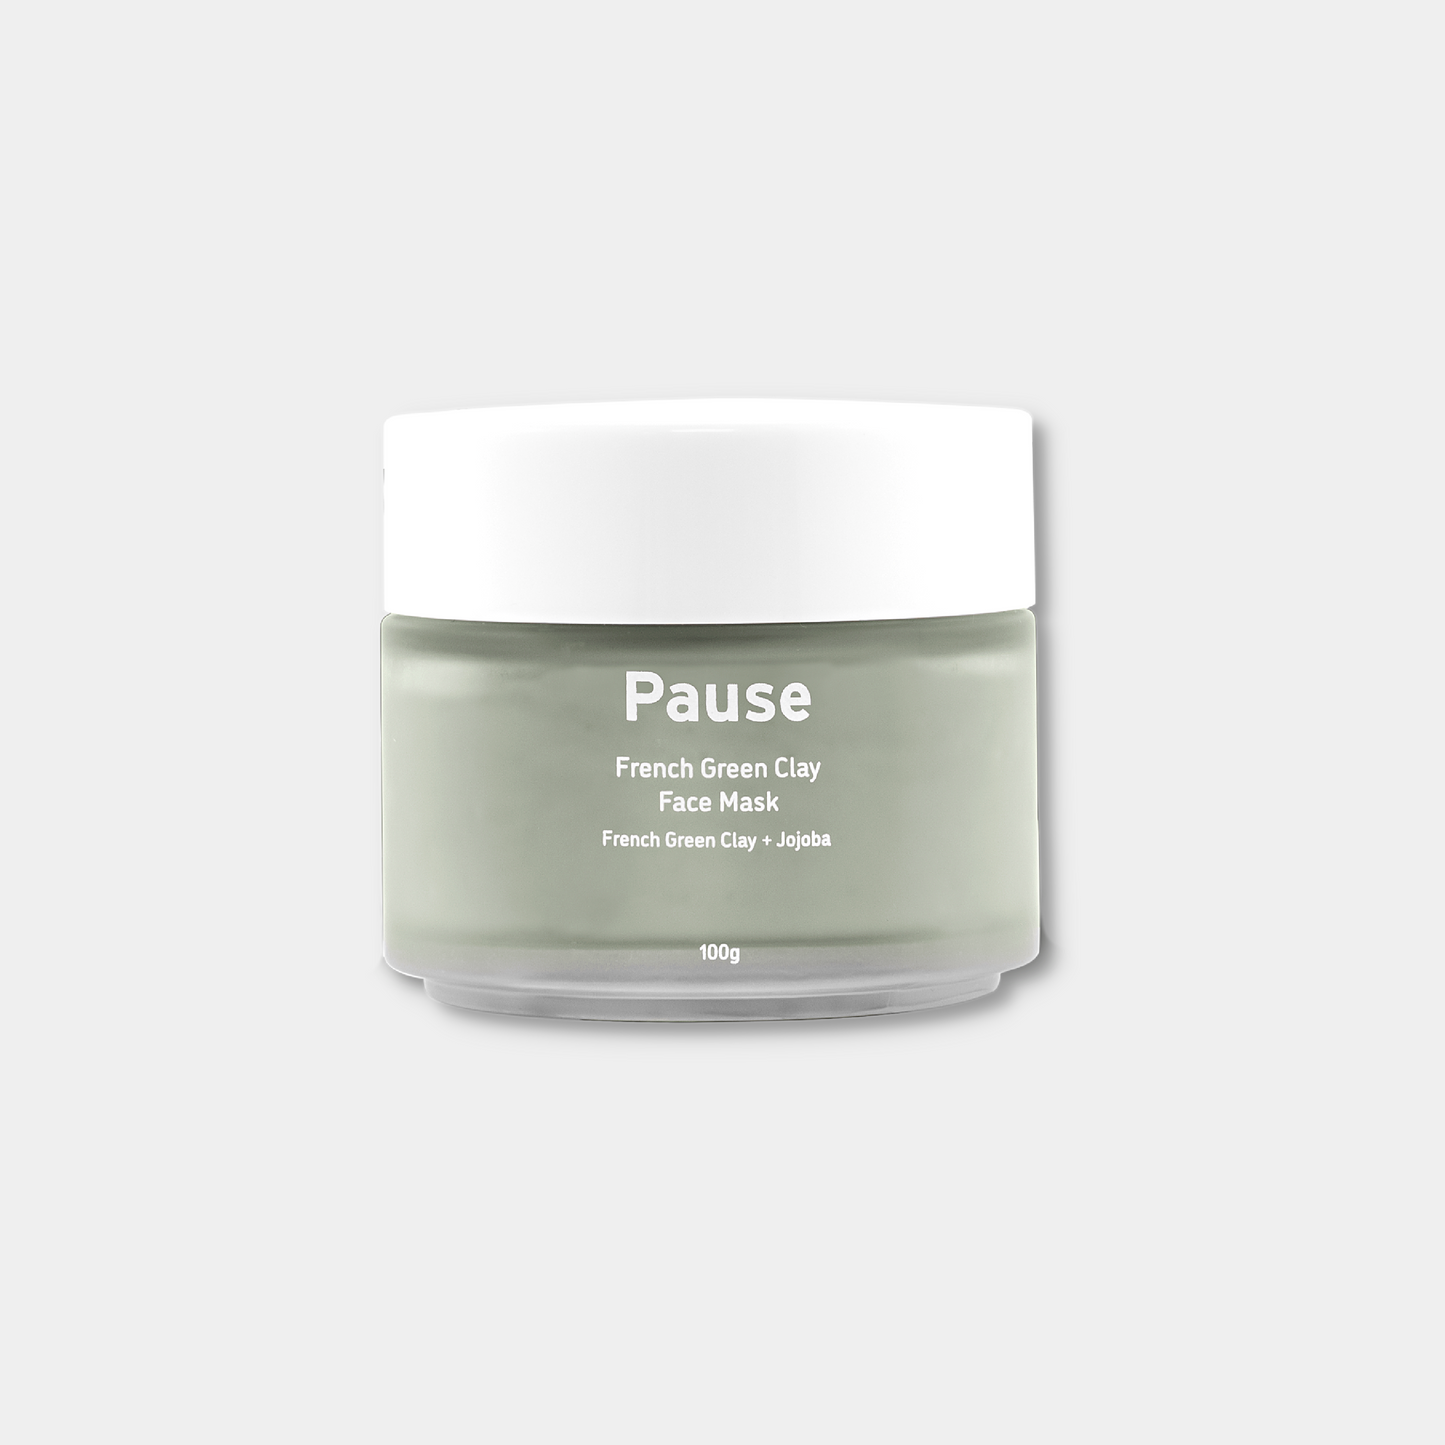 Pause & Balance - French Green Clay Mask 100g